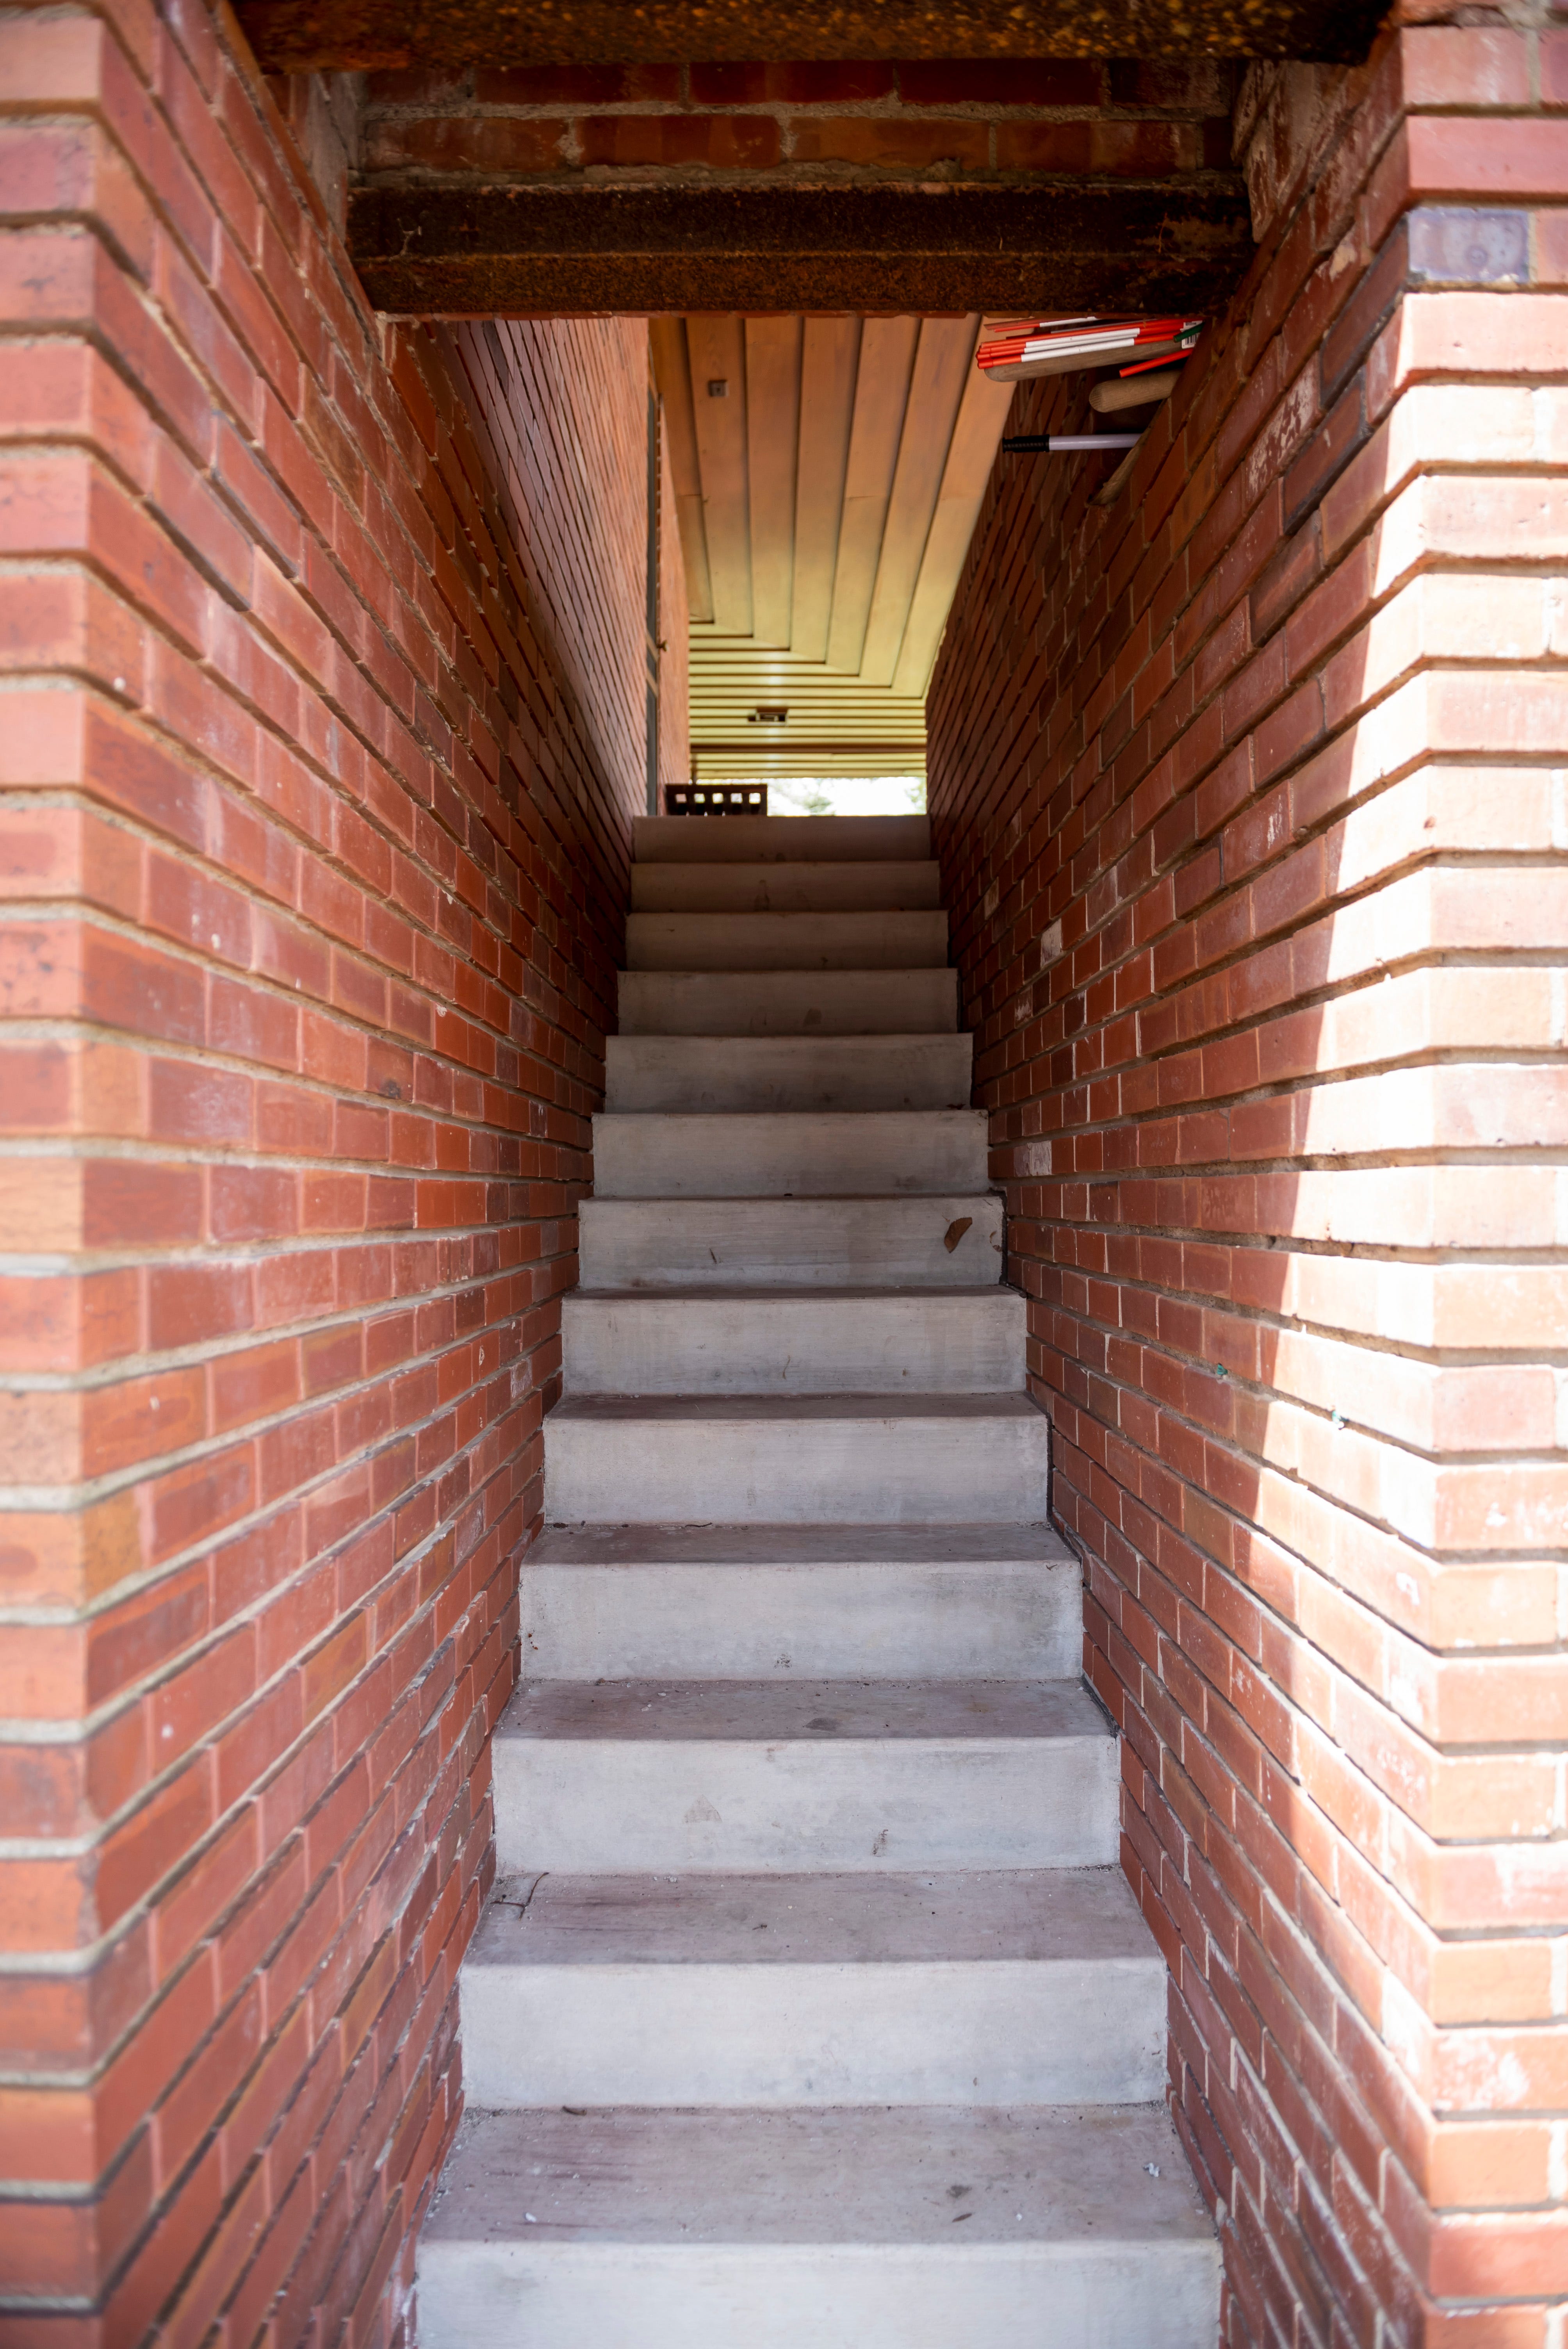 A skinny stairwell leads from the carport to the grounds.